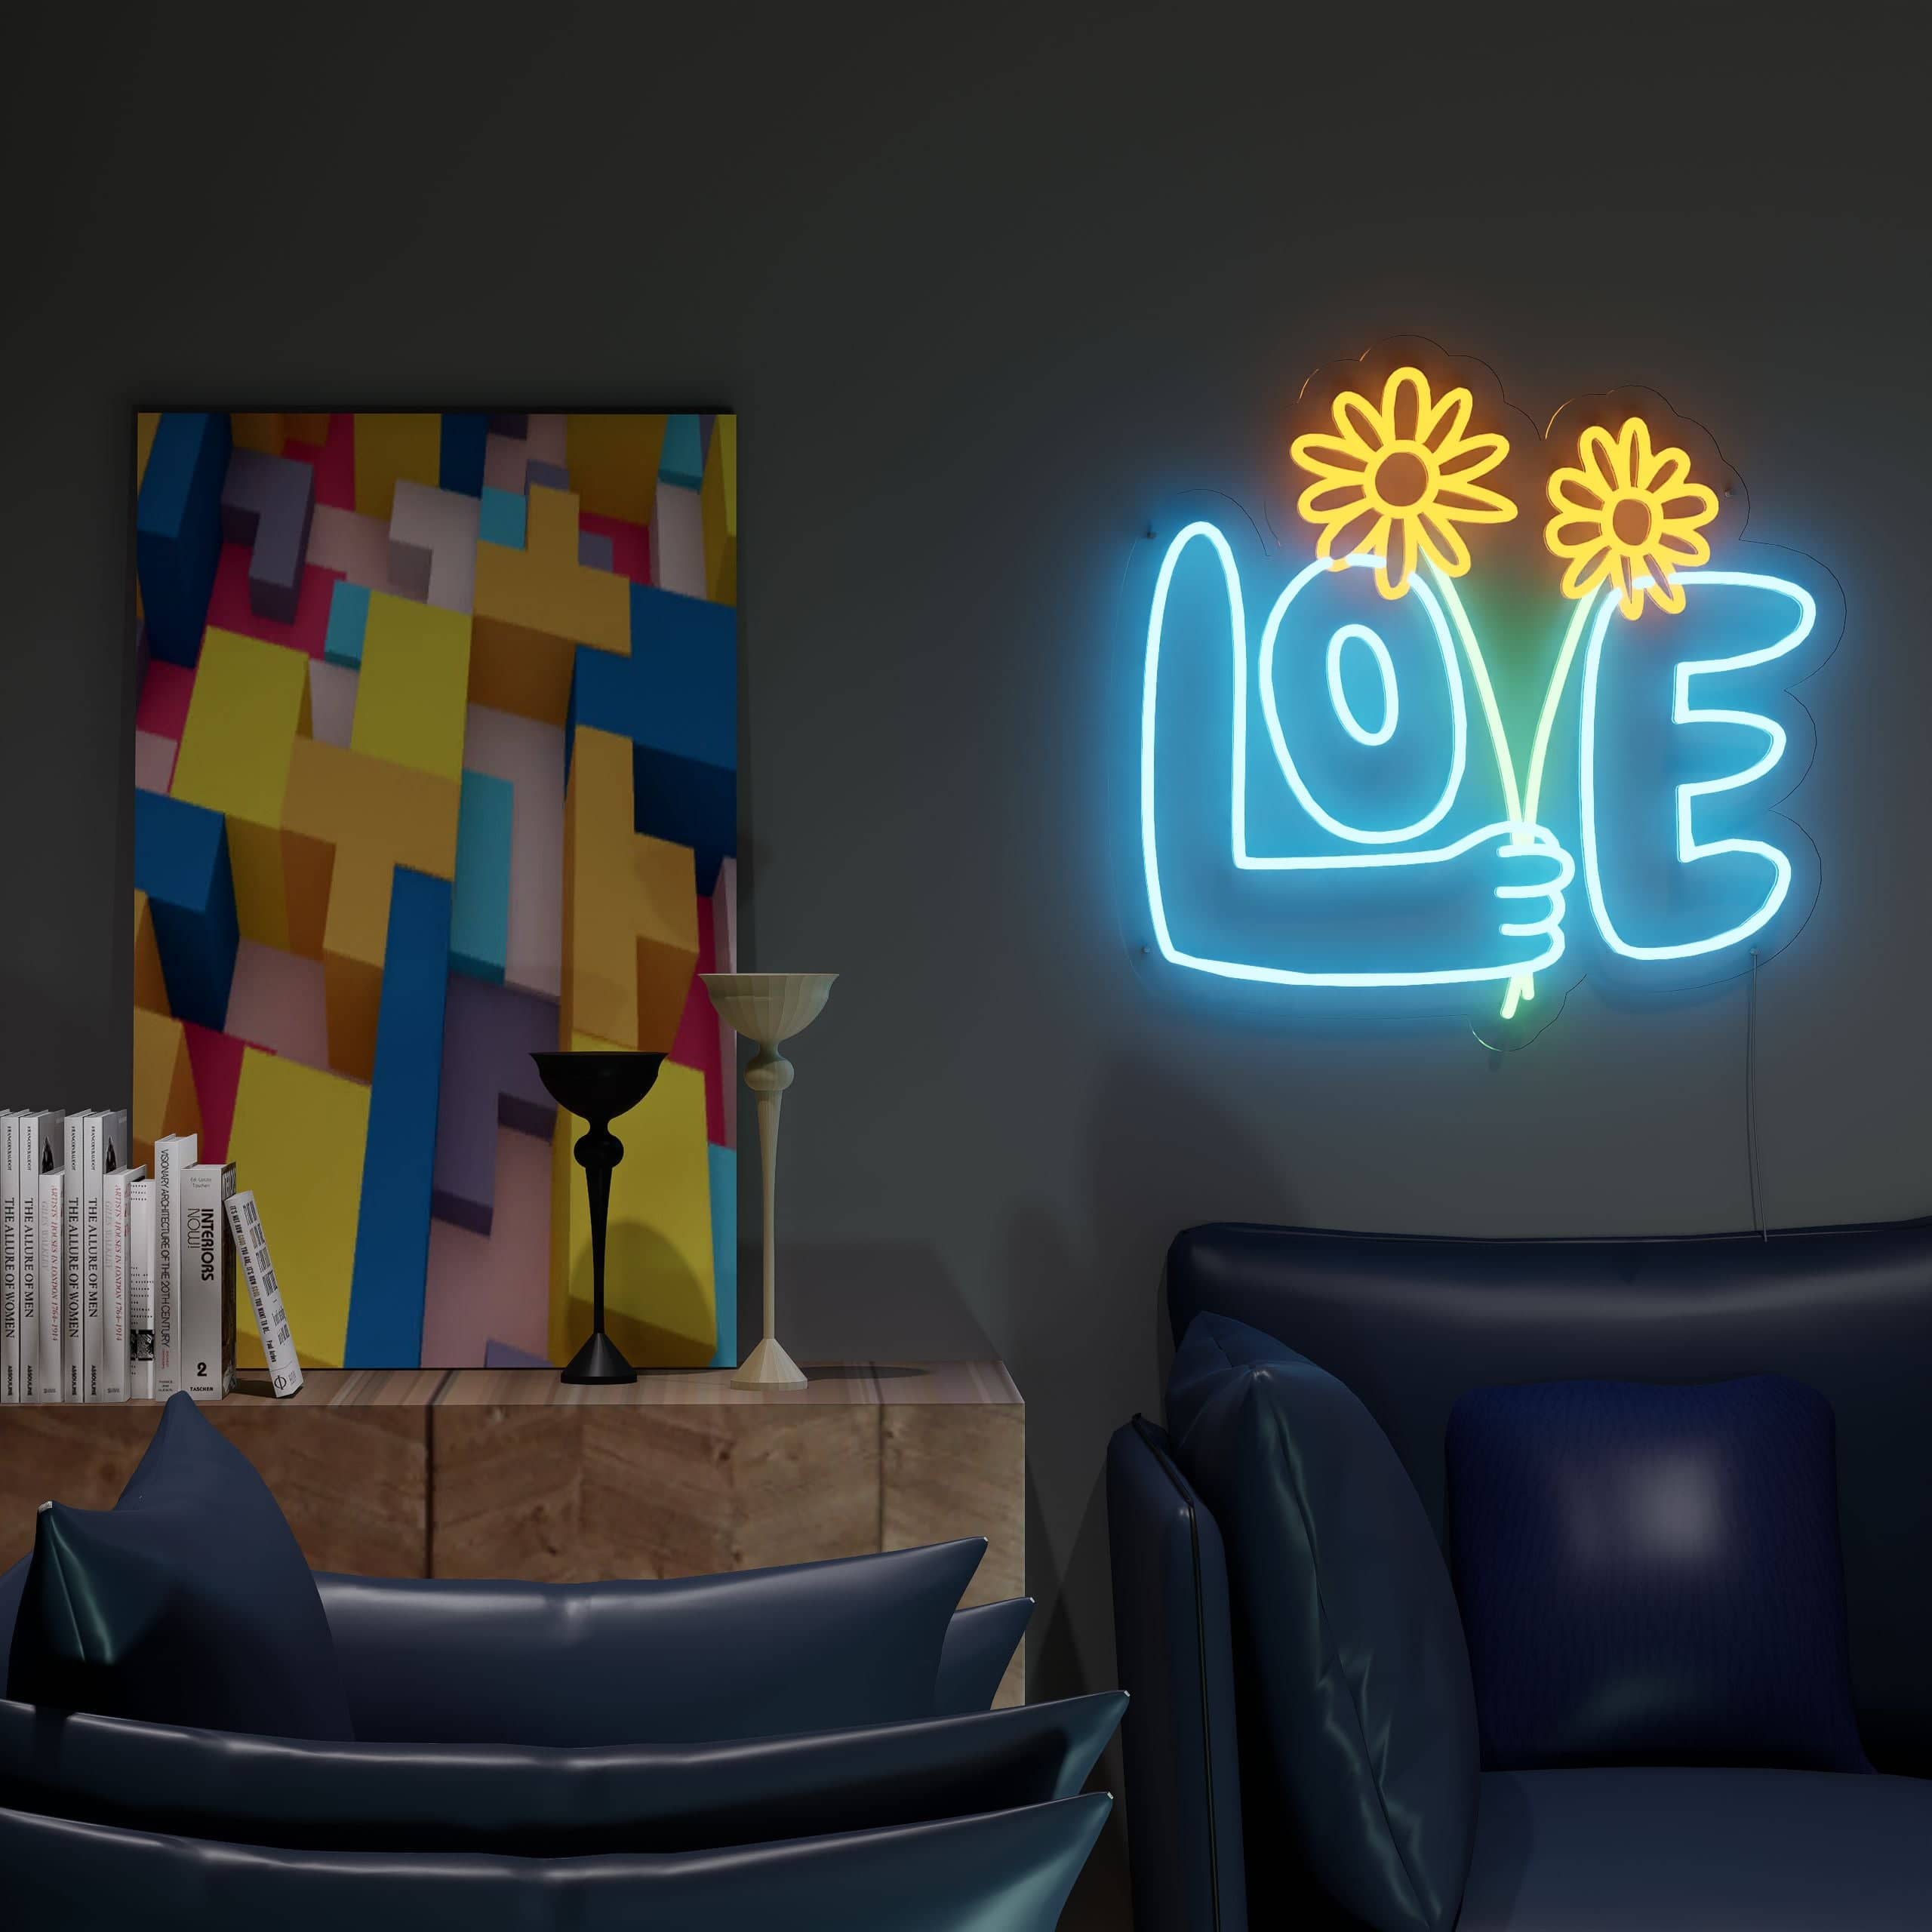 Express warmth with Love of Flower Neon Sign lighting